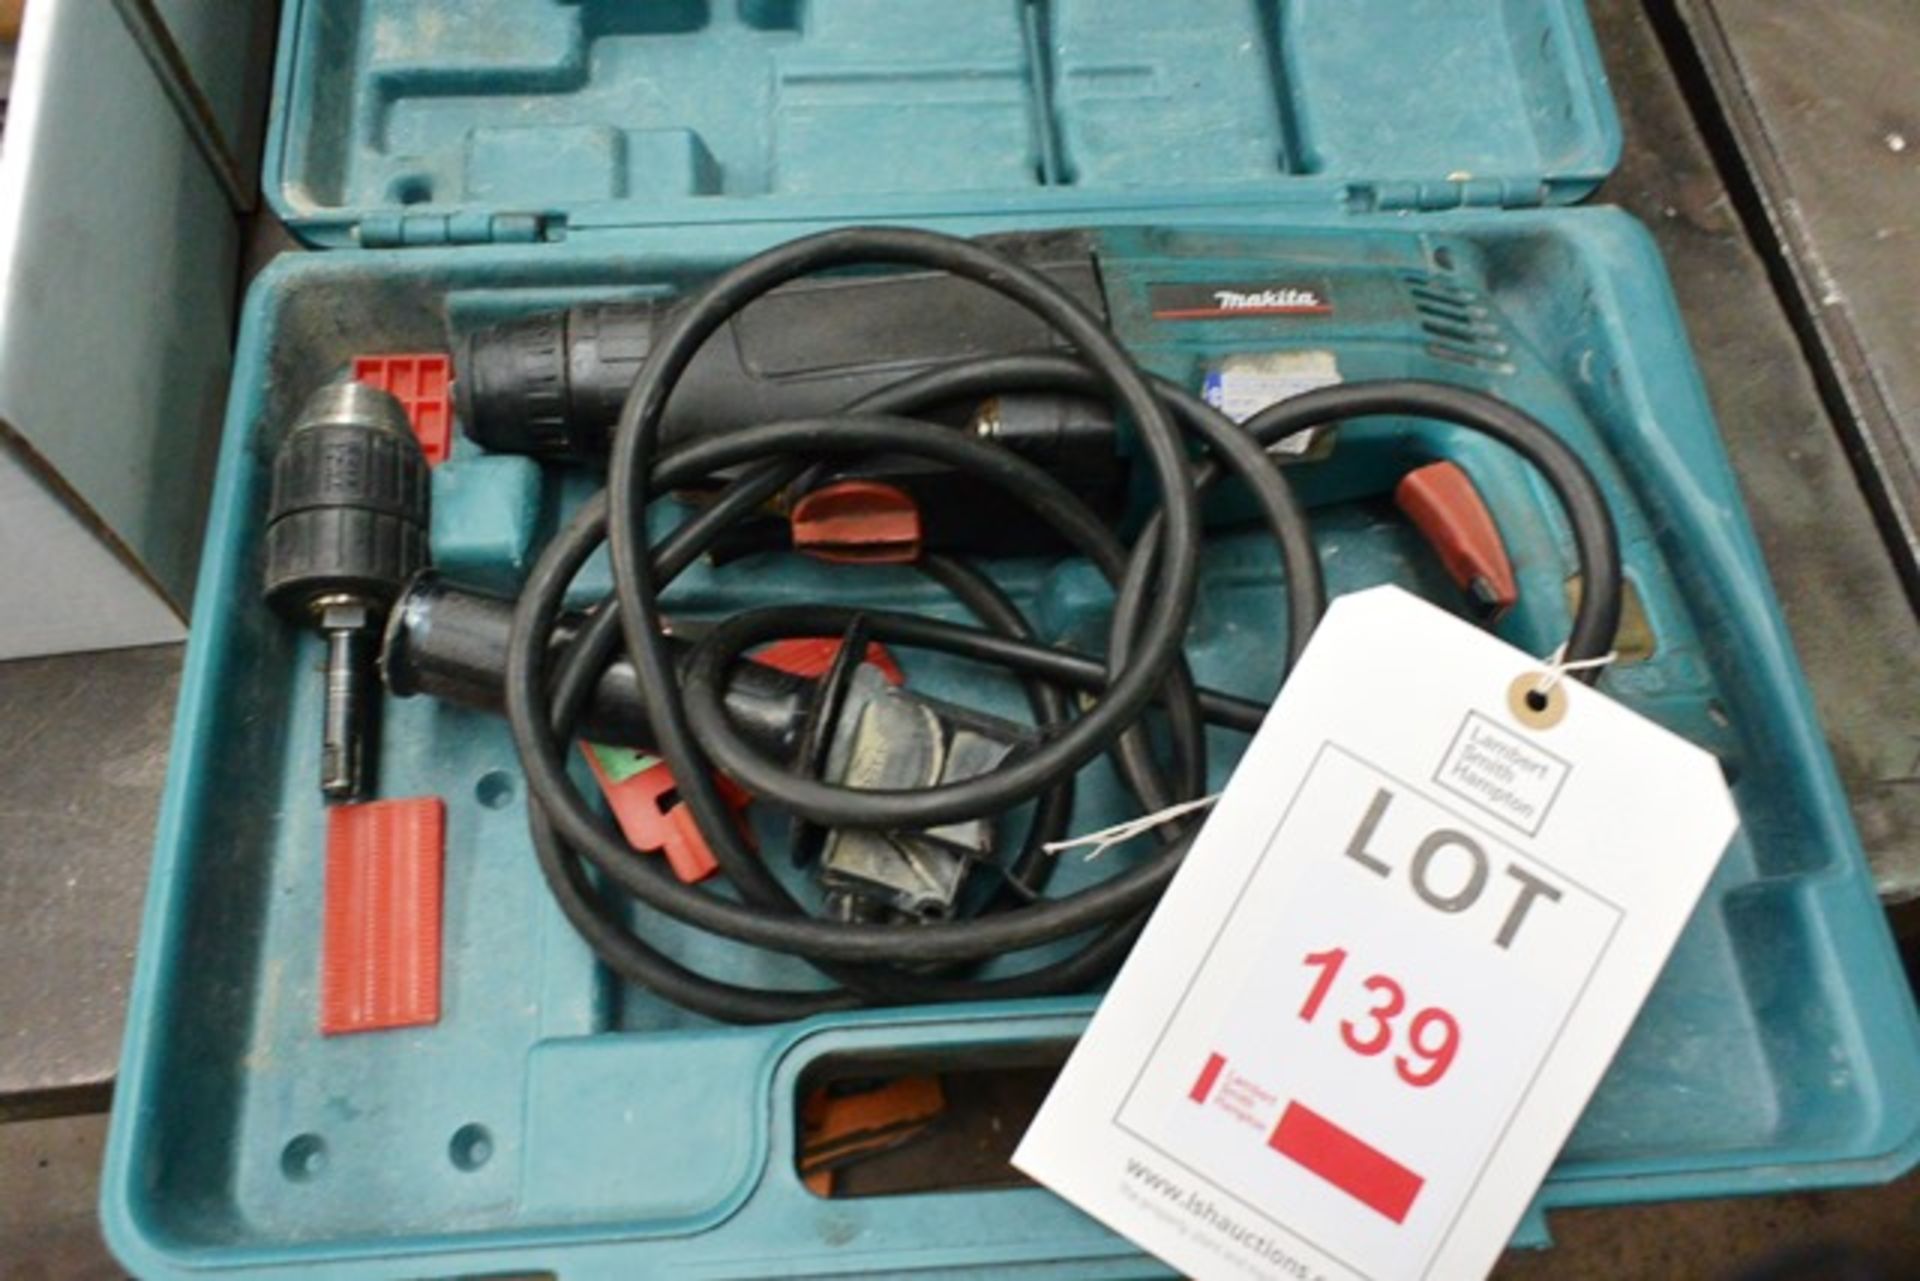 Makita HR2400 rotary hammer drill, serial no: 5950 IE with case (sold as spares/repairs only, no